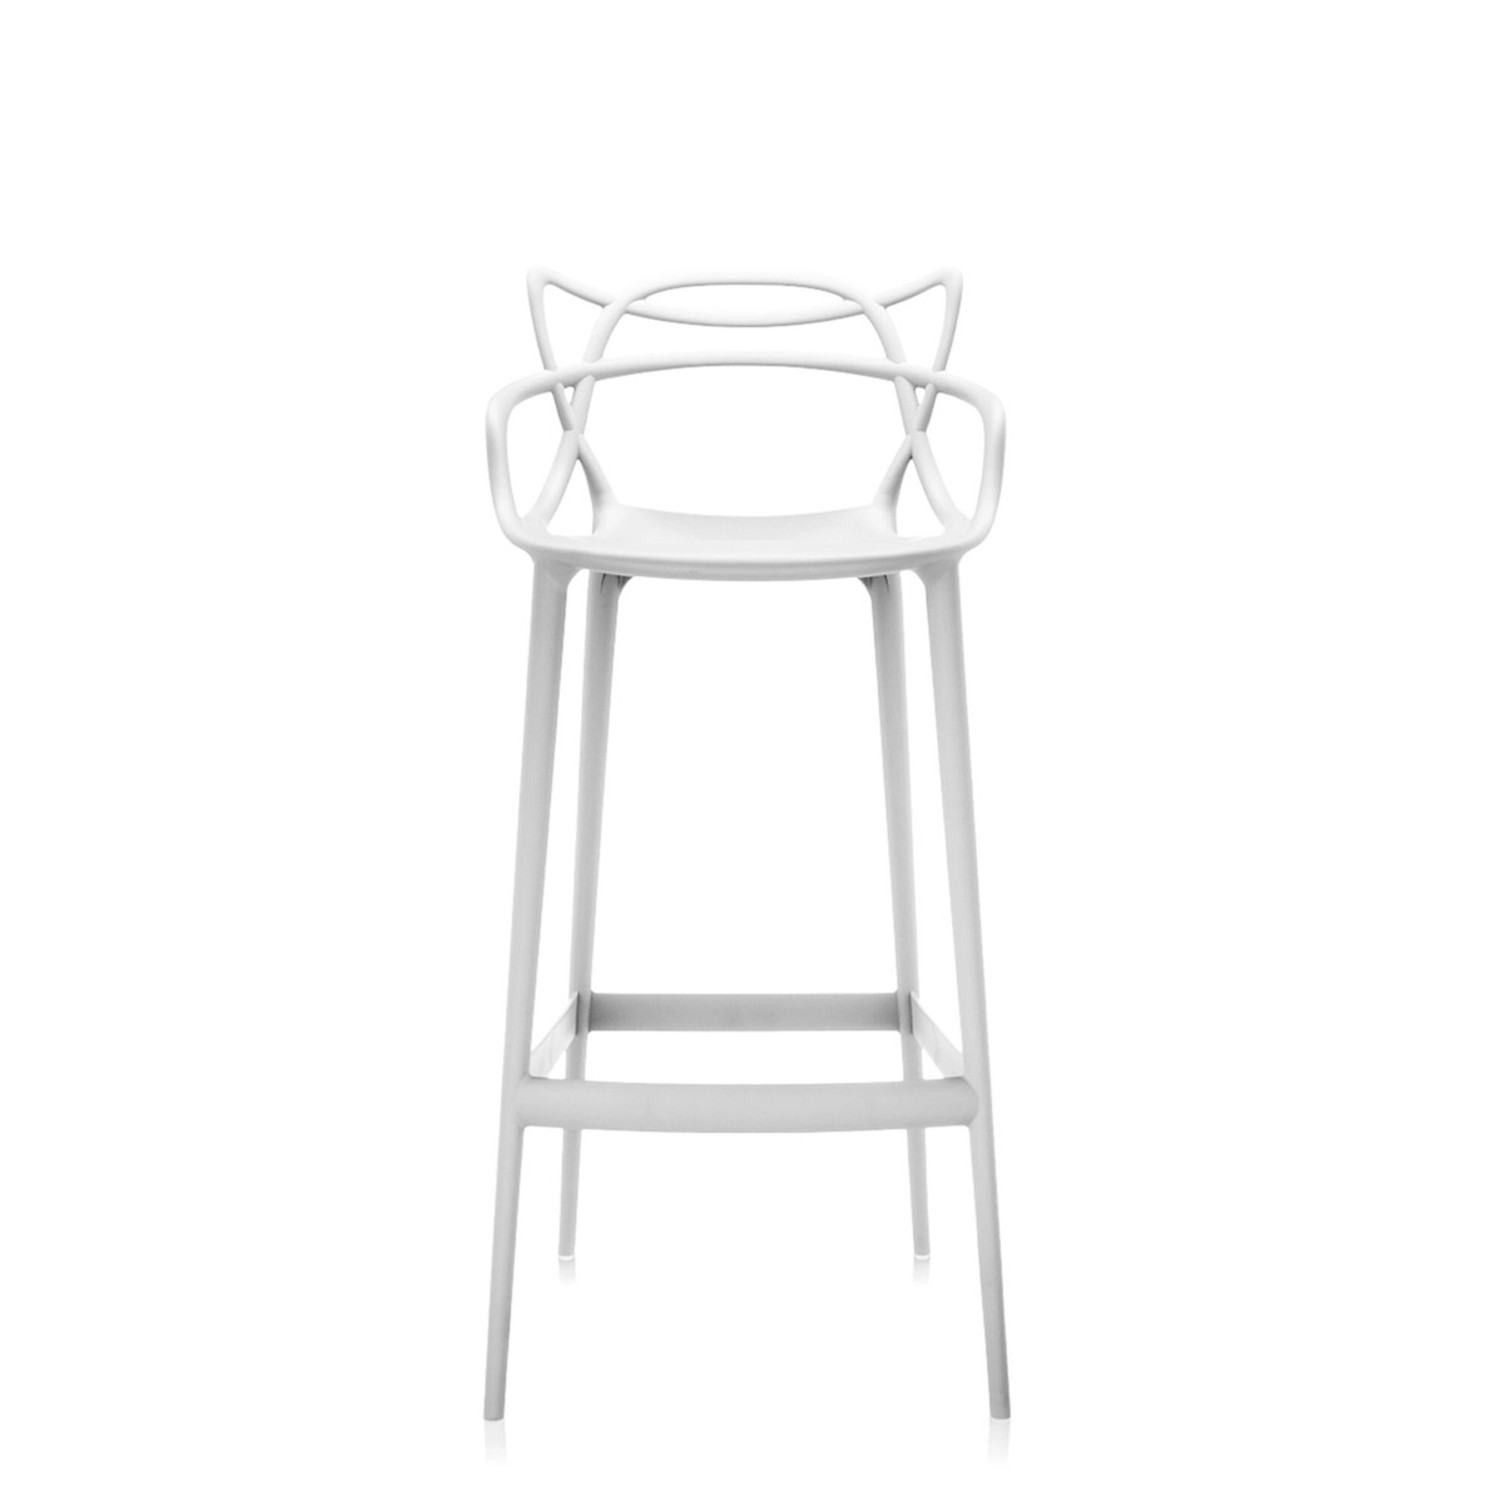 https://www.ambienteundobjectonline.de/out/pictures/master/product/1/kartell_masters_barhockerl_wei_586803_sitzhhe75cm_ambienteundobjectonline_1.jpg